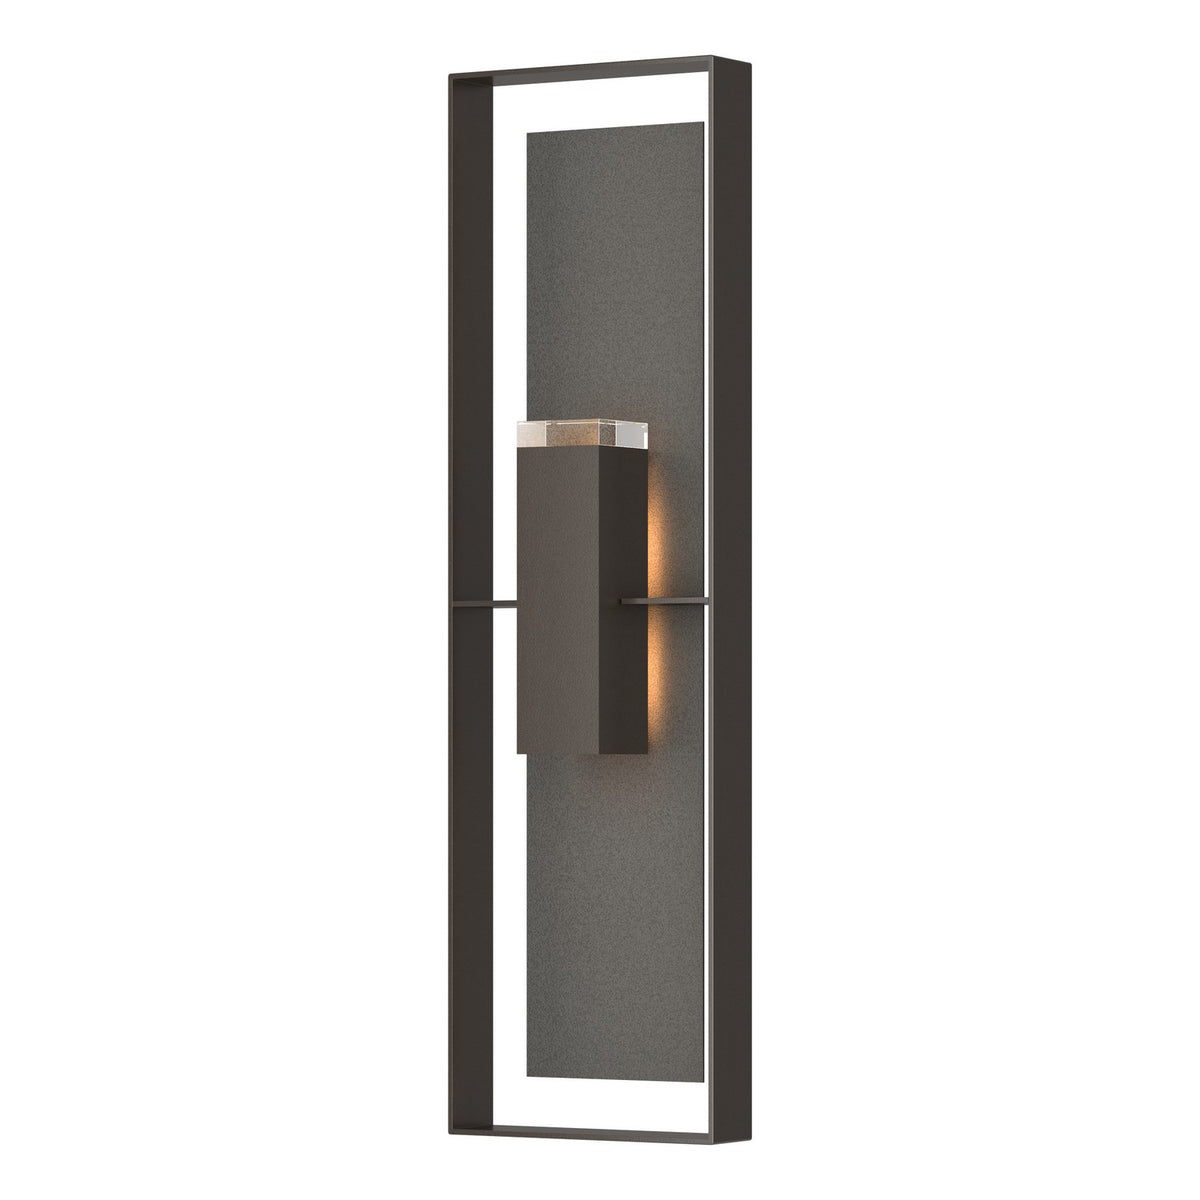 Hubbardton Forge - 302608-SKT-14-20-ZM0736 - Two Light Outdoor Wall Sconce - Shadow Box - Coastal Oil Rubbed Bronze